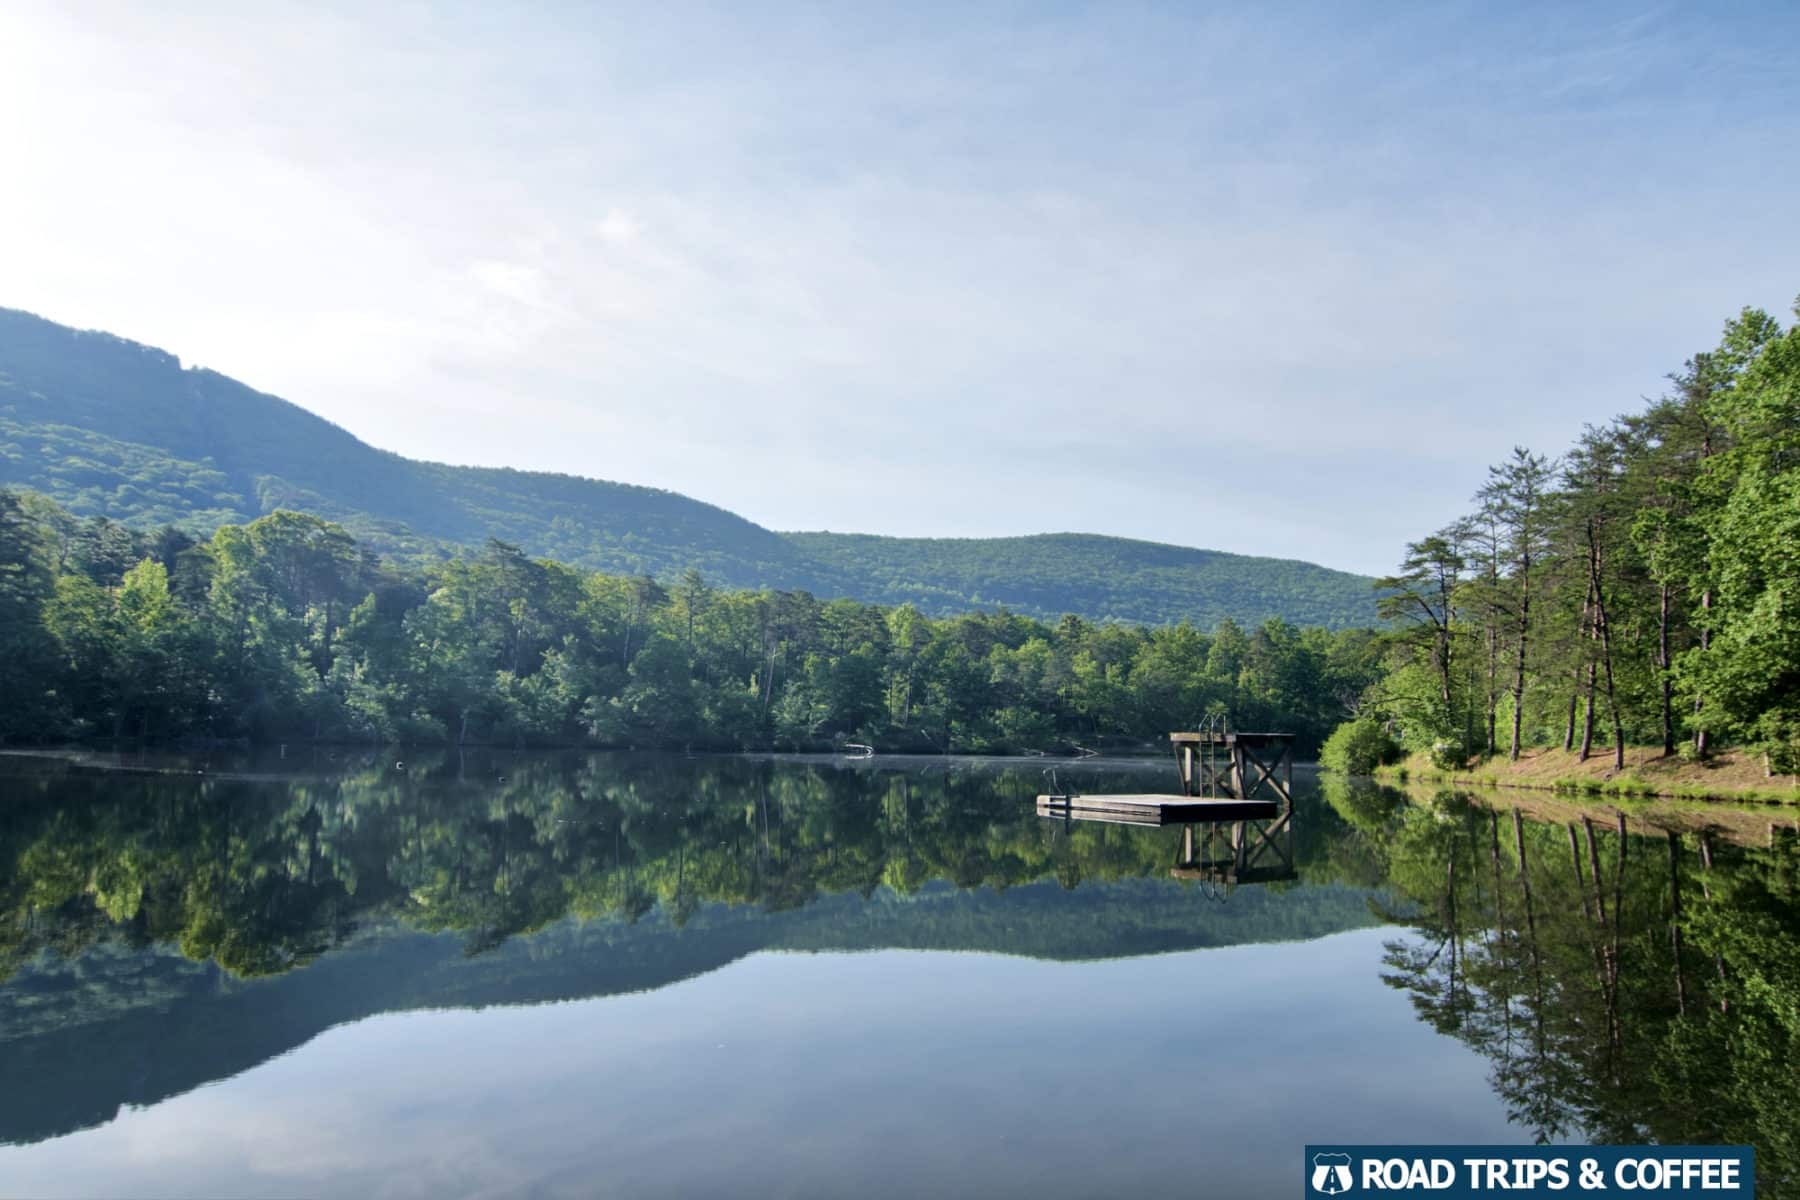 Perfectly calm water on a large lake reflecting the surrounding mountain and trees at Cheaha State Park in Alabama.